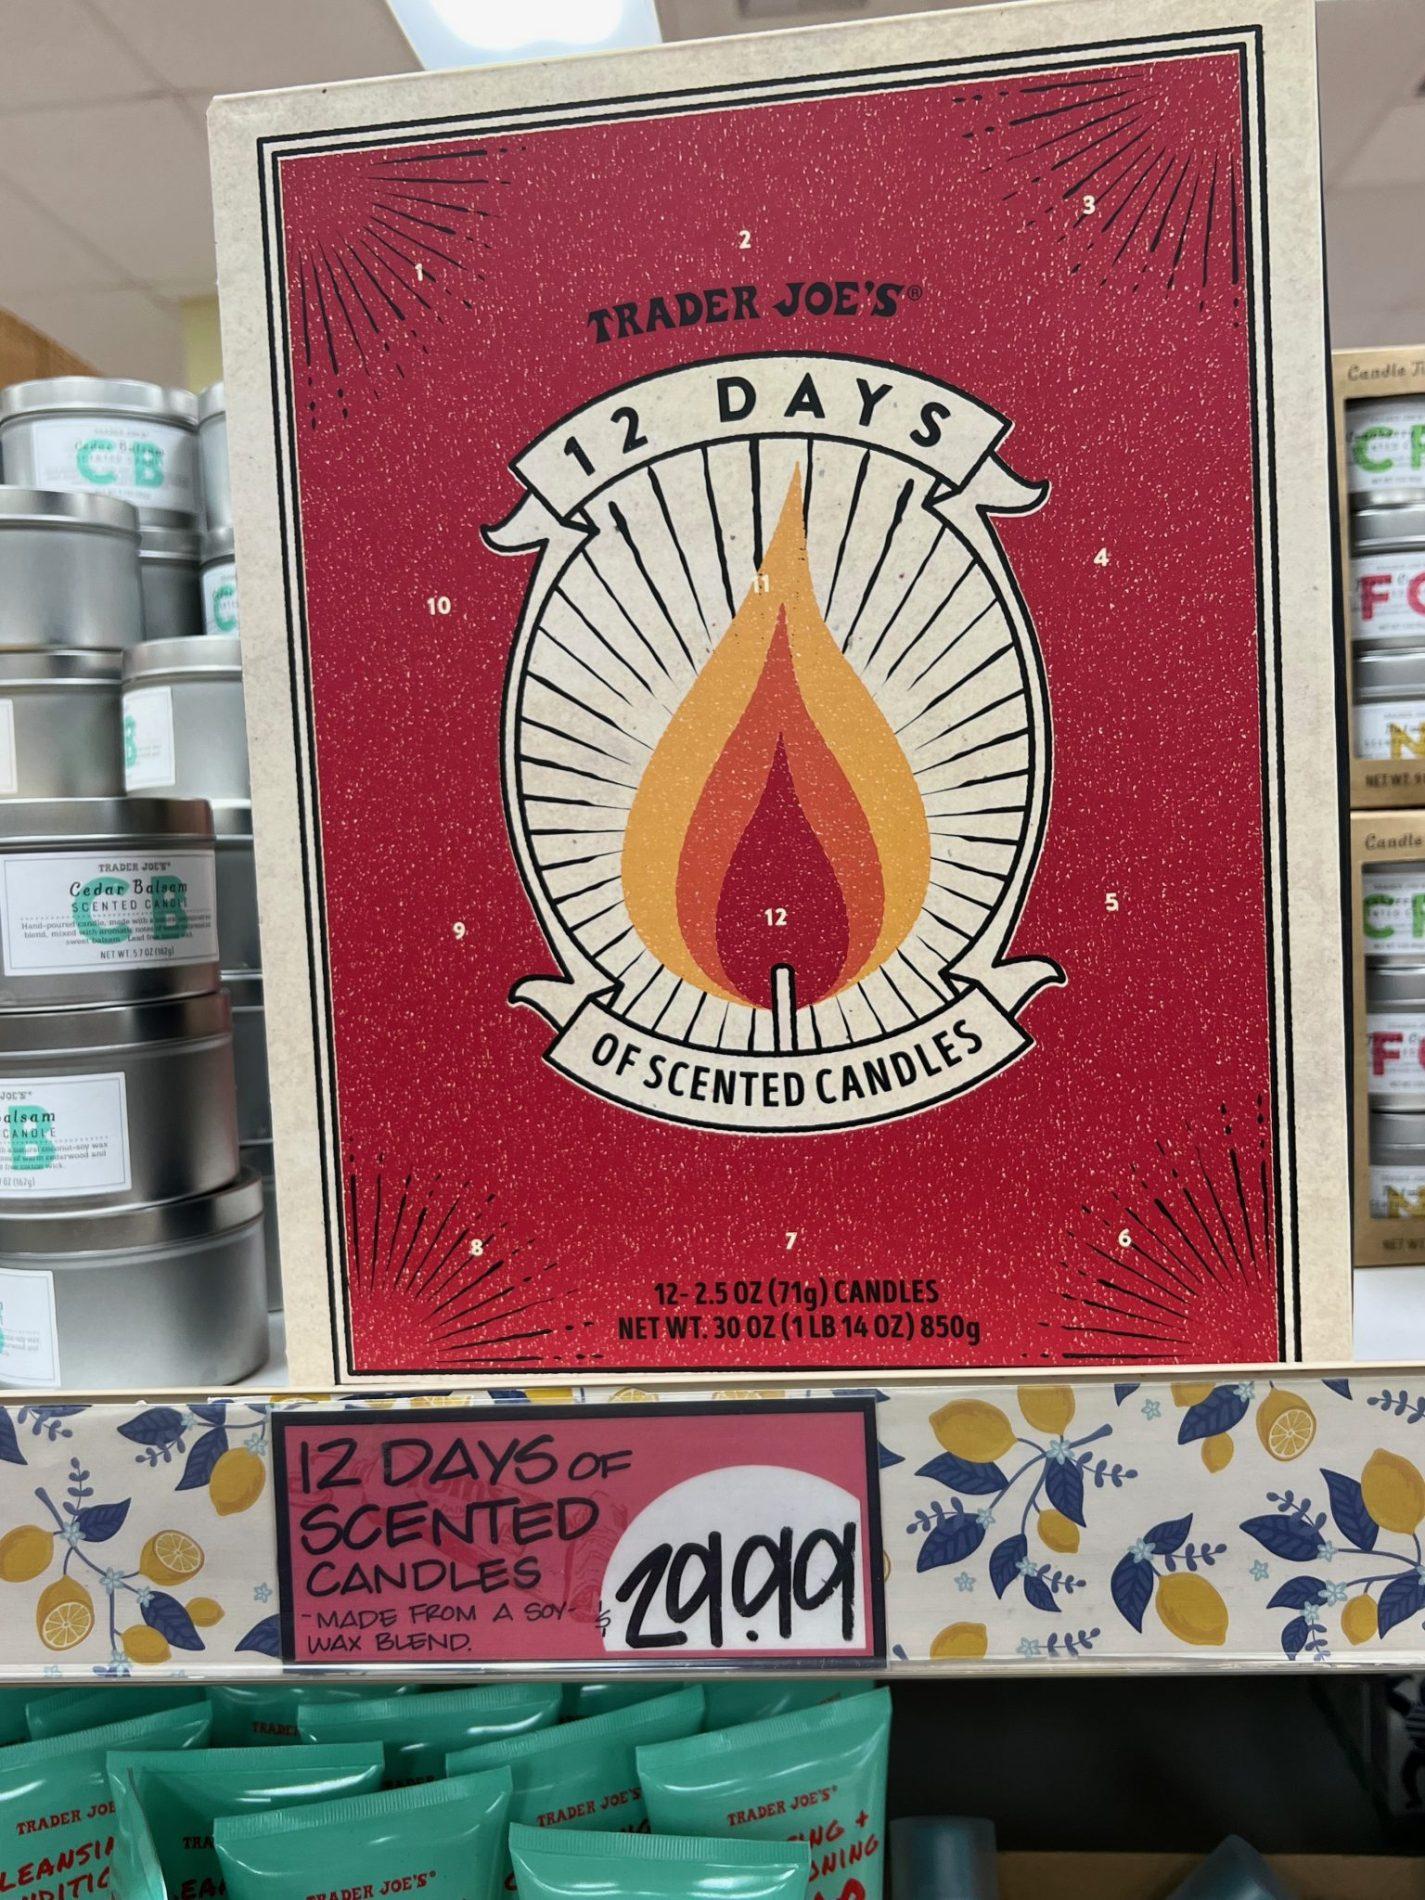 Trader Joe's 12 Days of Scented Candles 2023 Advent Calendar